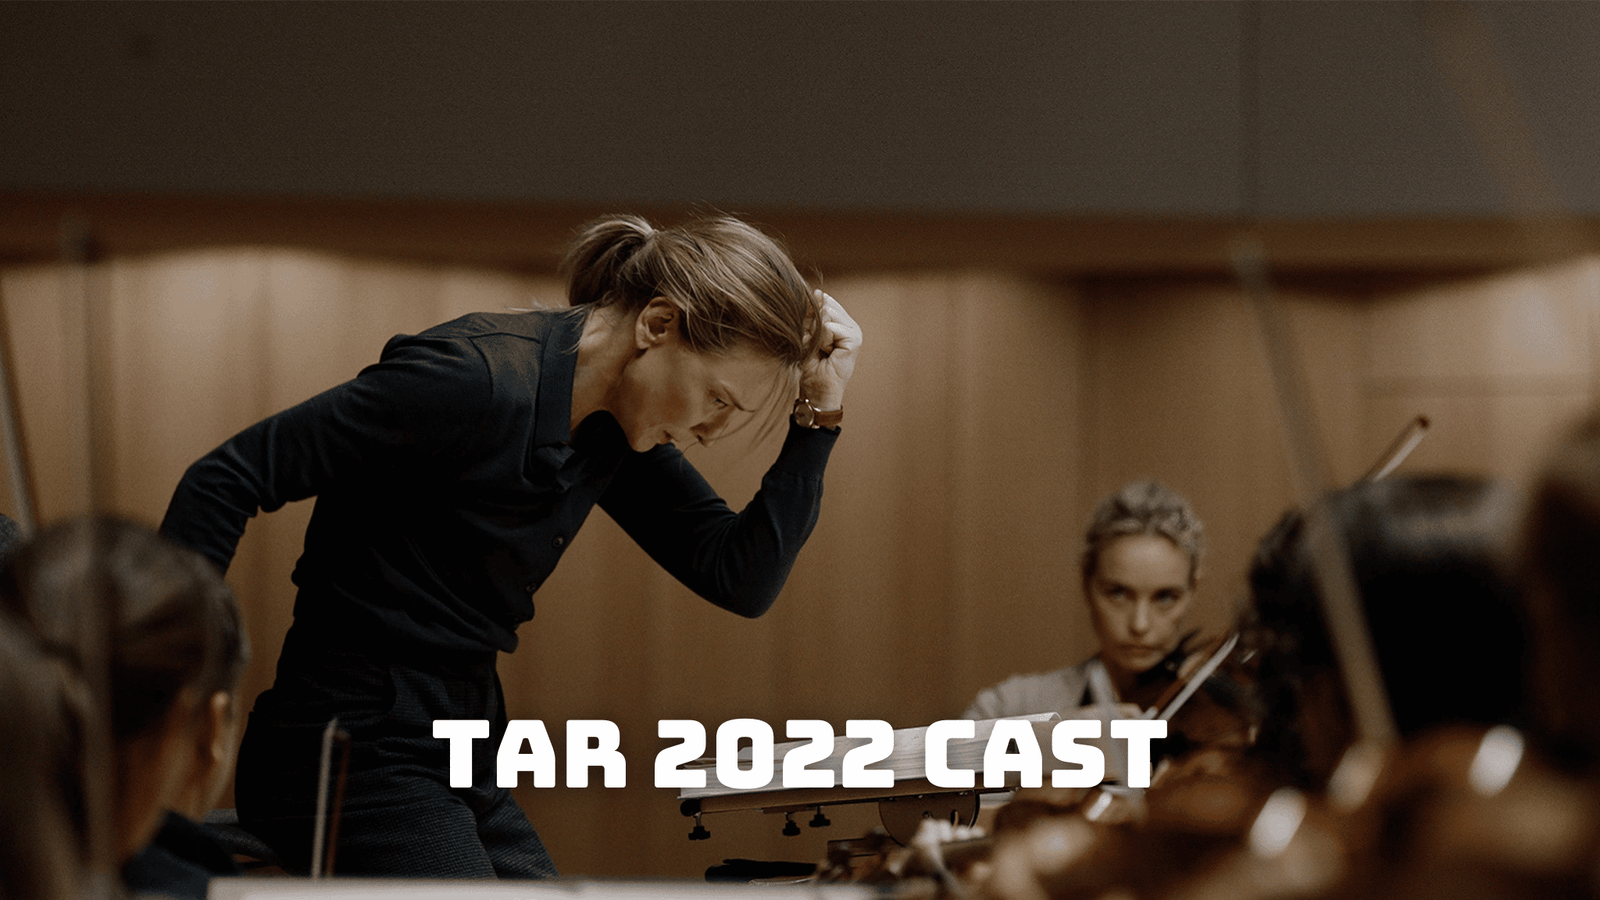 Tar 2022 Cast - Ages, Partners, Characters